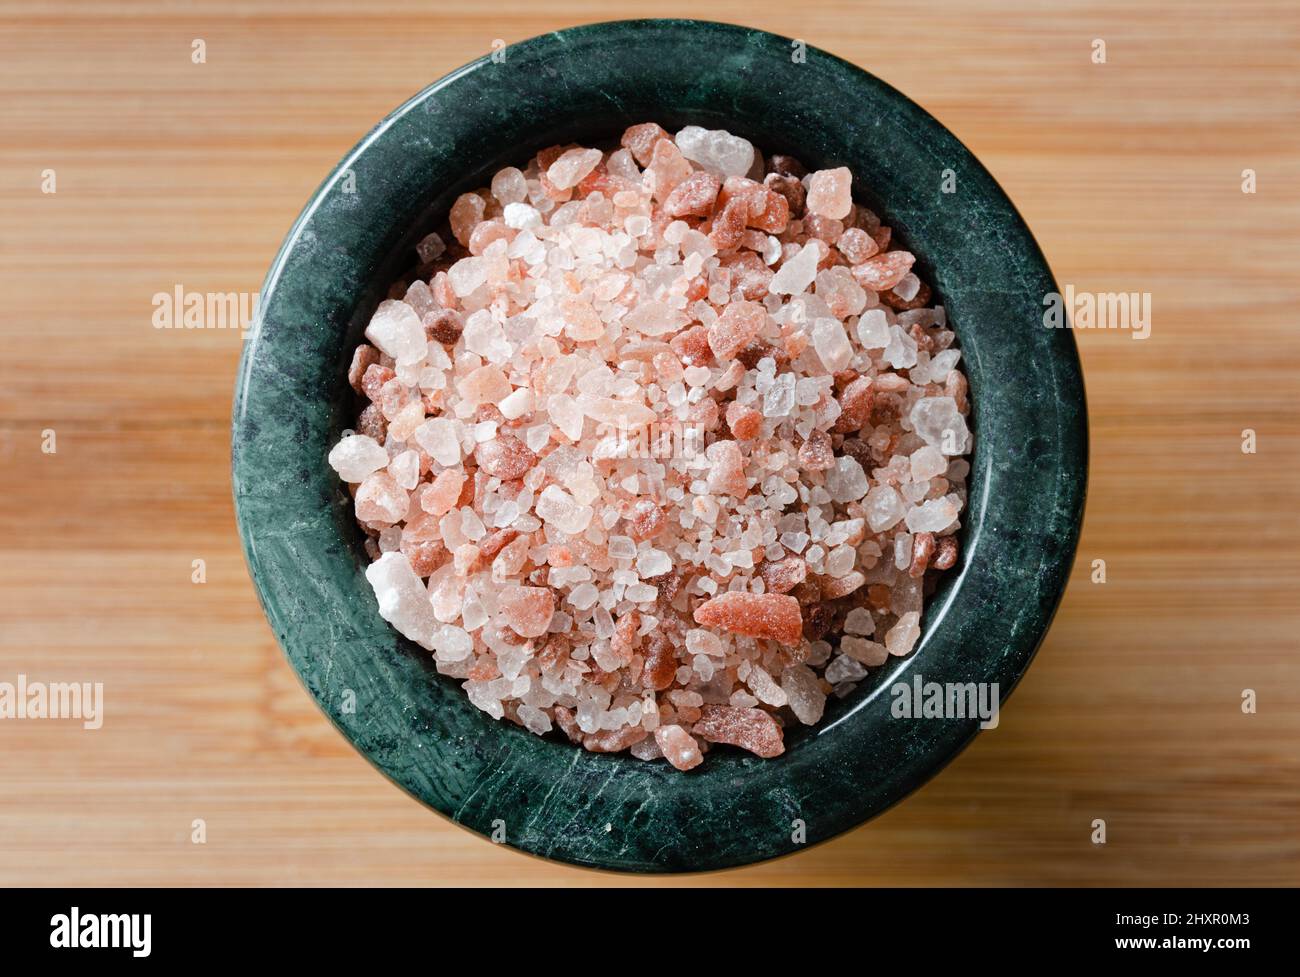 Top view of pink salt in green bowl on wood table Stock Photo